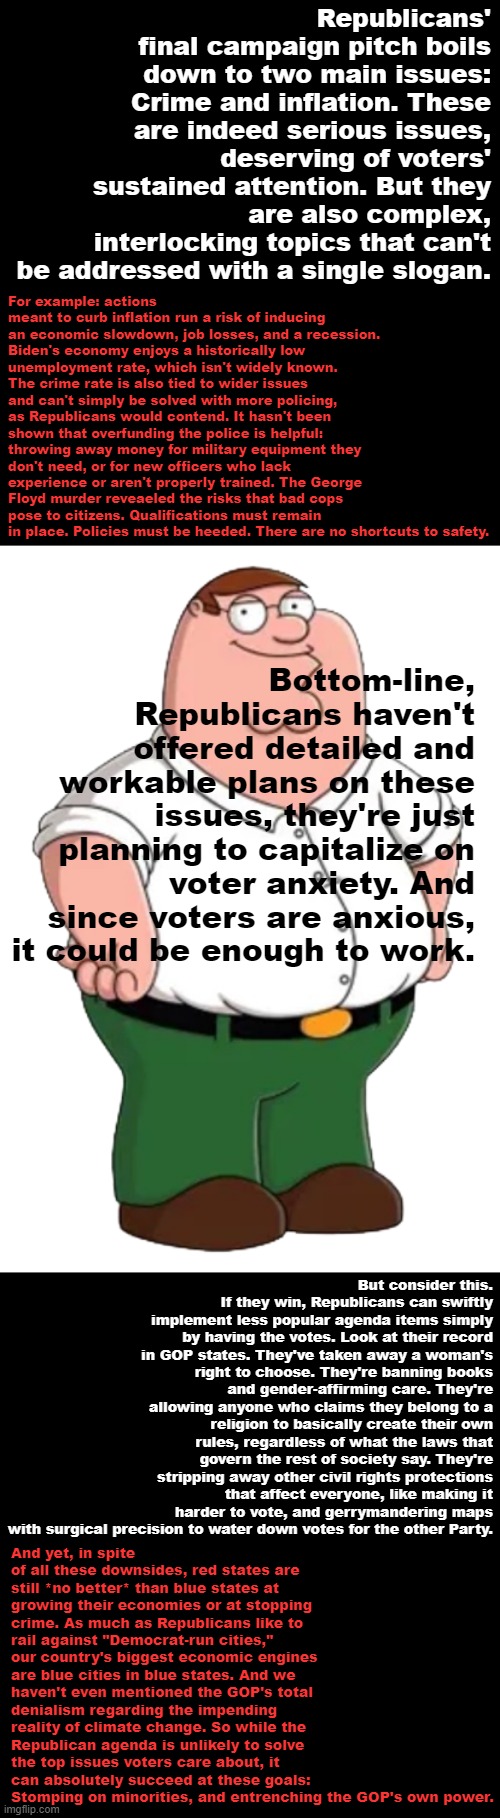 Peter Griffin explains why he's voting Democratic. Thank you for attending his TED talk. | Republicans' final campaign pitch boils down to two main issues: Crime and inflation. These are indeed serious issues, deserving of voters' sustained attention. But they are also complex, interlocking topics that can't be addressed with a single slogan. For example: actions meant to curb inflation run a risk of inducing an economic slowdown, job losses, and a recession. Biden's economy enjoys a historically low unemployment rate, which isn't widely known. The crime rate is also tied to wider issues and can't simply be solved with more policing, as Republicans would contend. It hasn't been shown that overfunding the police is helpful: throwing away money for military equipment they don't need, or for new officers who lack experience or aren't properly trained. The George Floyd murder reveaeled the risks that bad cops pose to citizens. Qualifications must remain in place. Policies must be heeded. There are no shortcuts to safety. Bottom-line, Republicans haven't offered detailed and workable plans on these issues, they're just planning to capitalize on voter anxiety. And since voters are anxious, it could be enough to work. But consider this. If they win, Republicans can swiftly implement less popular agenda items simply by having the votes. Look at their record in GOP states. They've taken away a woman's right to choose. They're banning books and gender-affirming care. They're allowing anyone who claims they belong to a religion to basically create their own rules, regardless of what the laws that govern the rest of society say. They're stripping away other civil rights protections that affect everyone, like making it harder to vote, and gerrymandering maps with surgical precision to water down votes for the other Party. And yet, in spite of all these downsides, red states are still *no better* than blue states at growing their economies or at stopping crime. As much as Republicans like to rail against "Democrat-run cities," our country's biggest economic engines are blue cities in blue states. And we haven't even mentioned the GOP's total denialism regarding the impending reality of climate change. So while the Republican agenda is unlikely to solve the top issues voters care about, it can absolutely succeed at these goals: Stomping on minorities, and entrenching the GOP's own power. | image tagged in peter griffin transparent | made w/ Imgflip meme maker